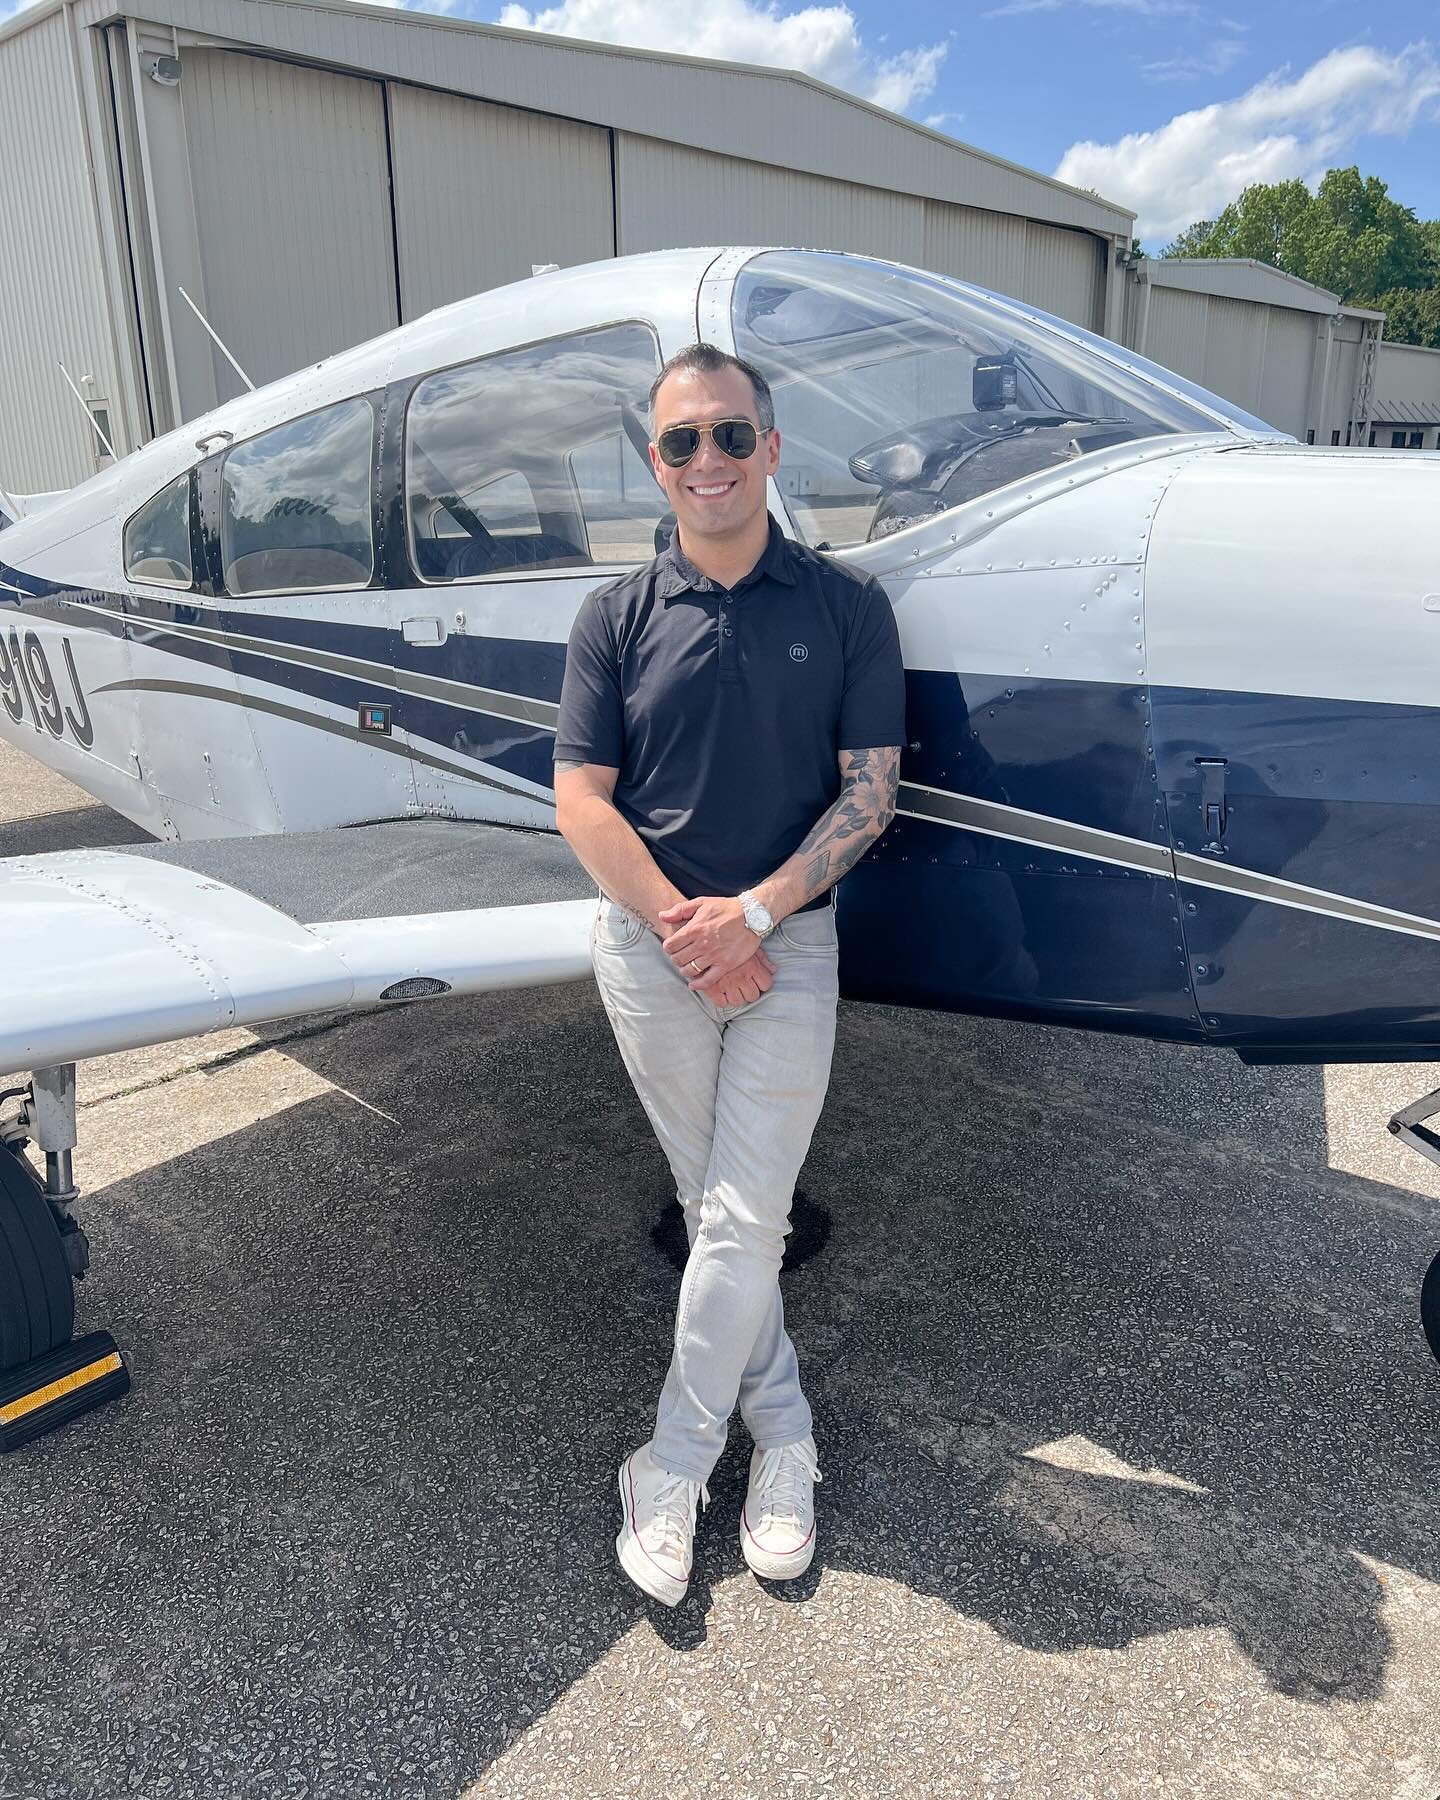 Congratulations to Christian on passing his IFR checkride!!! Time for some cloud surfing! ☁️☁️☁️